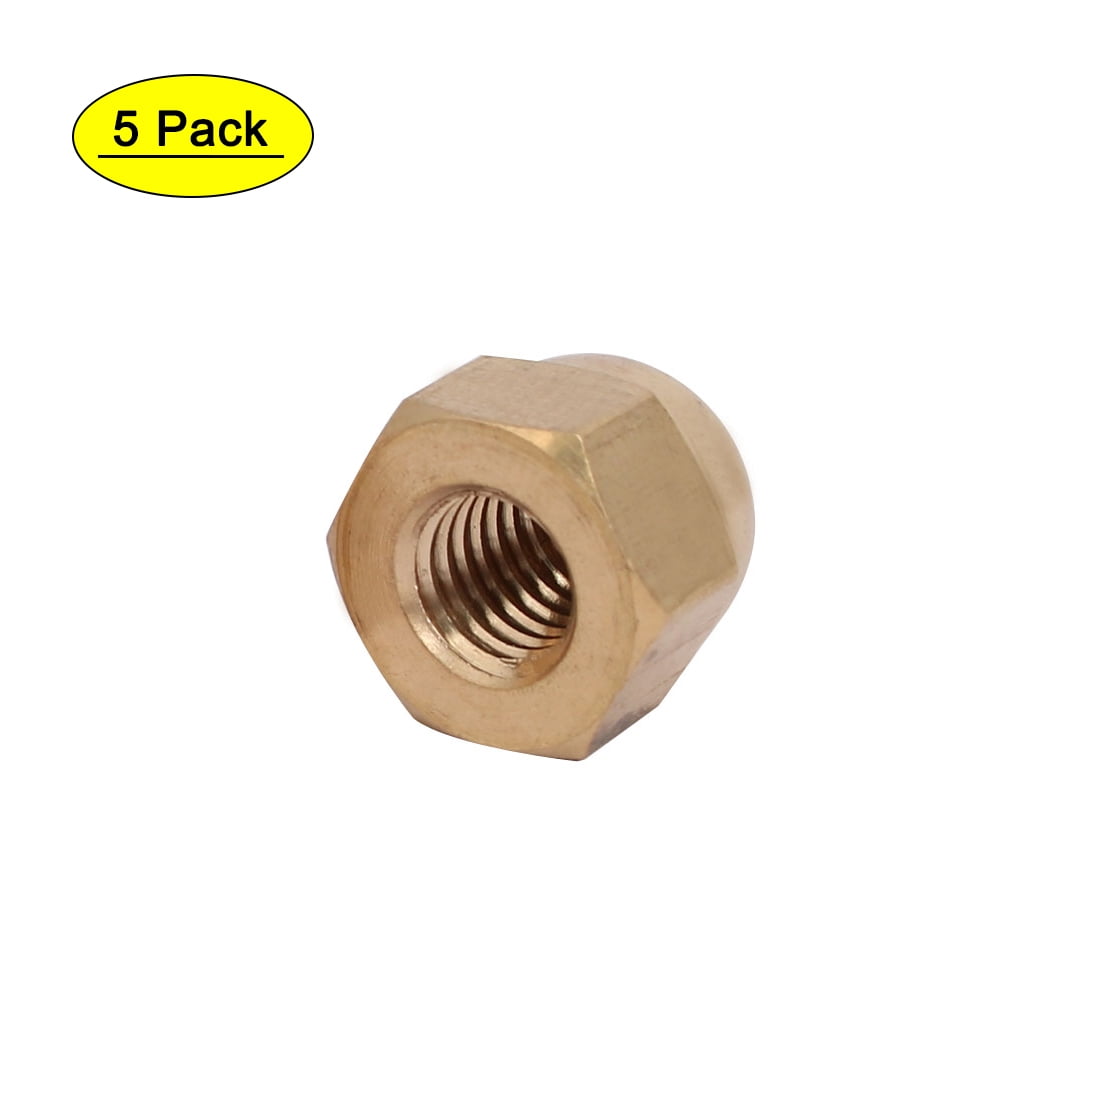 M6 SOLID BRASS HEXAGON  DOME NUTS WITH FREE M6 BRASS WASHERS 10 20 OR 50 PACKS 